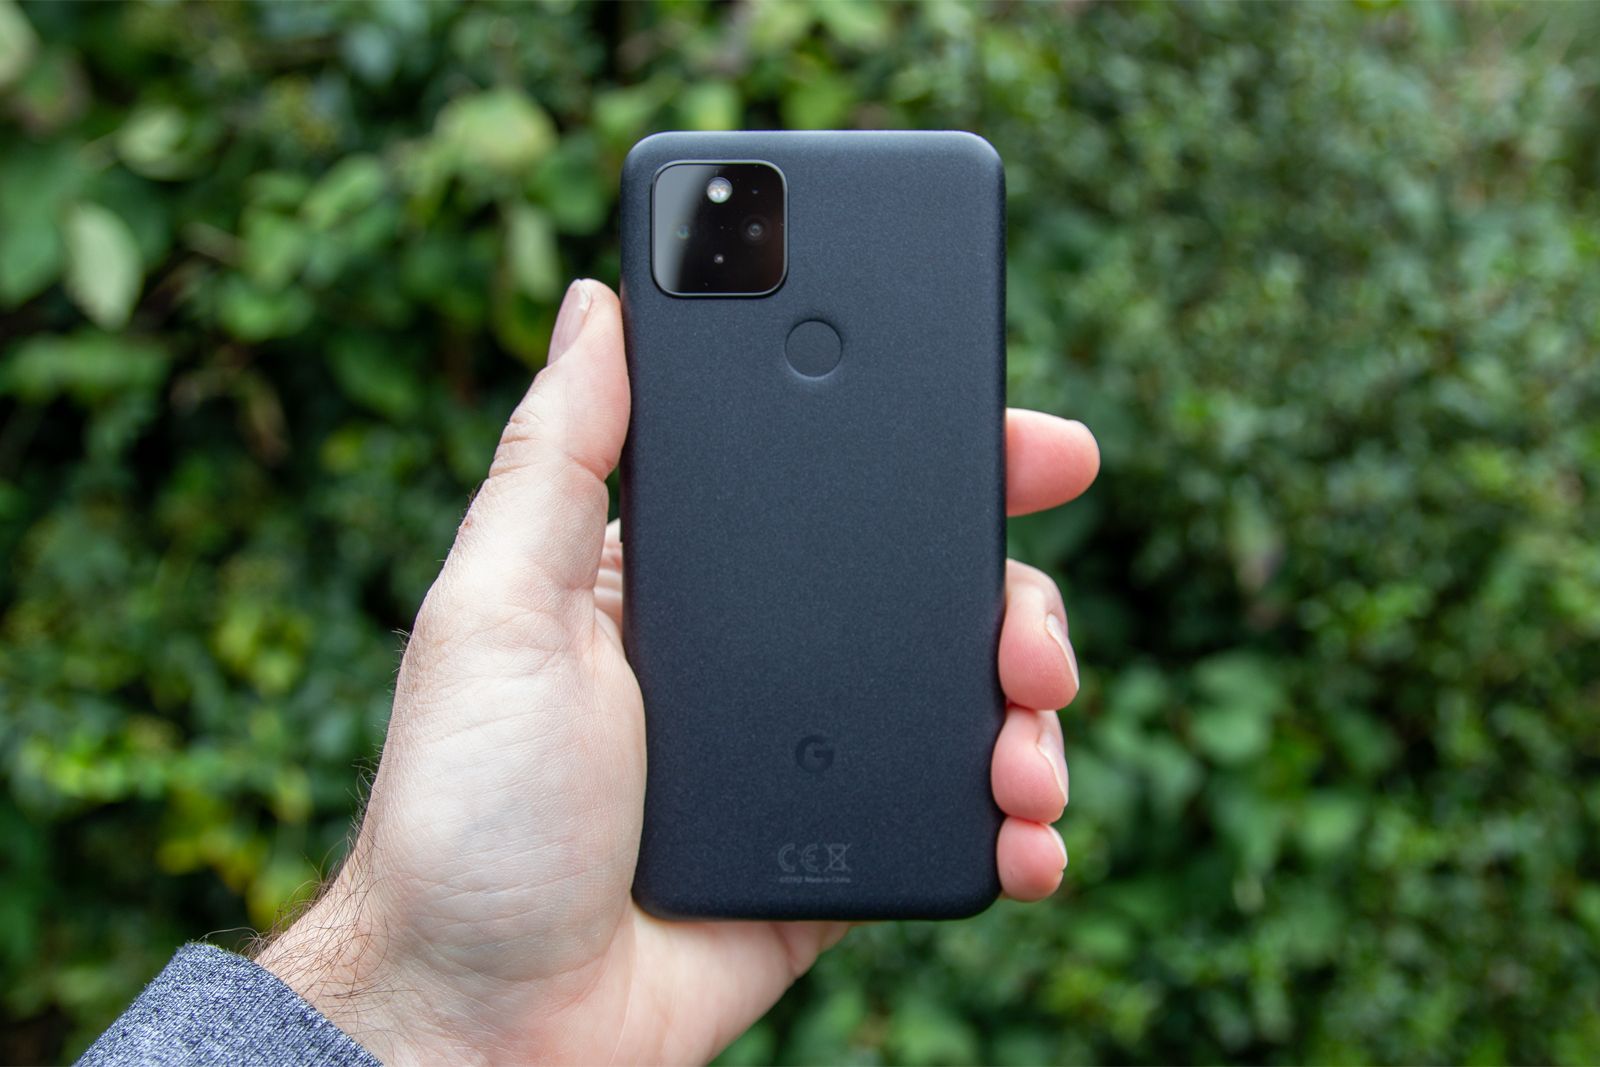 Review: The Google Pixel 5 aims to conquer the mid-range